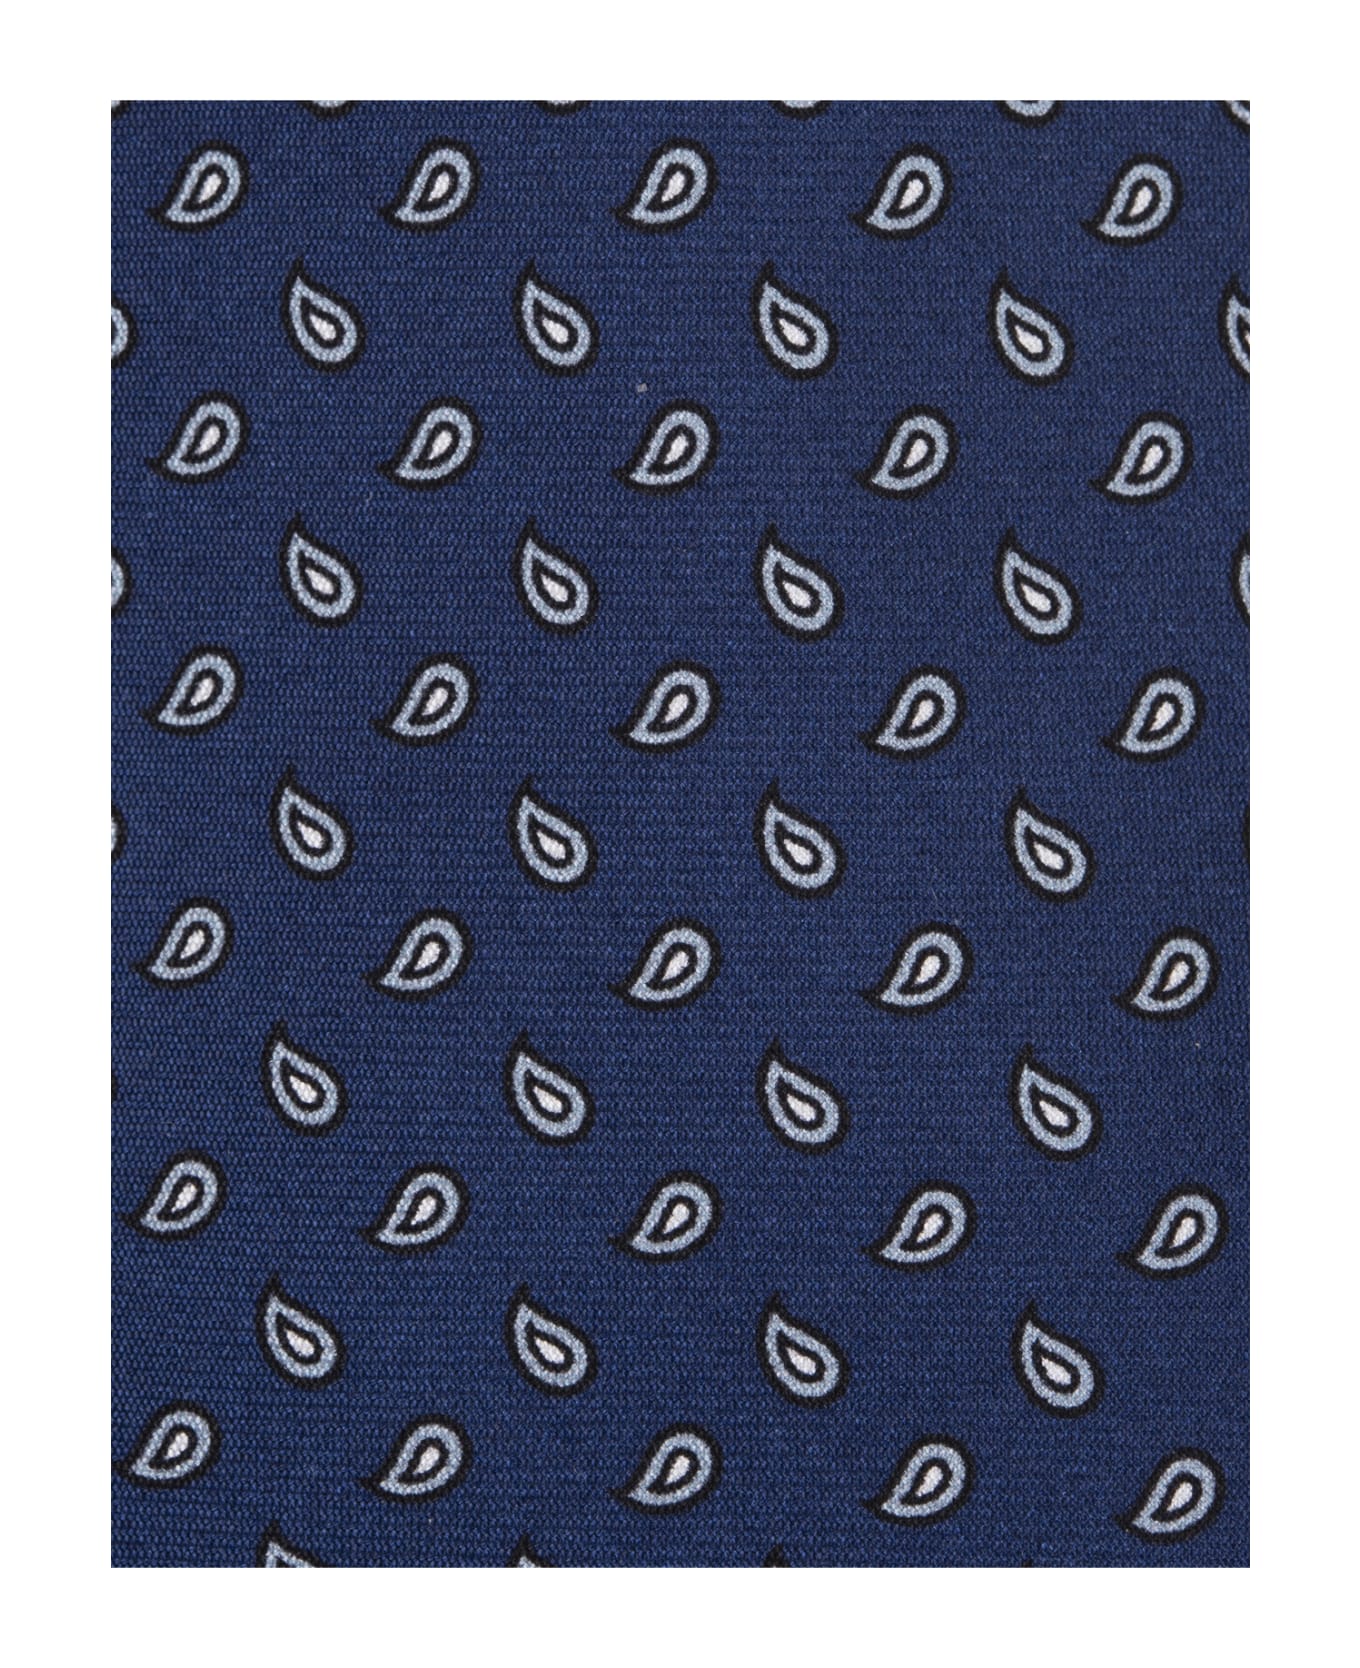 Kiton Blue Tie With Drops Pattern - Blue ネクタイ